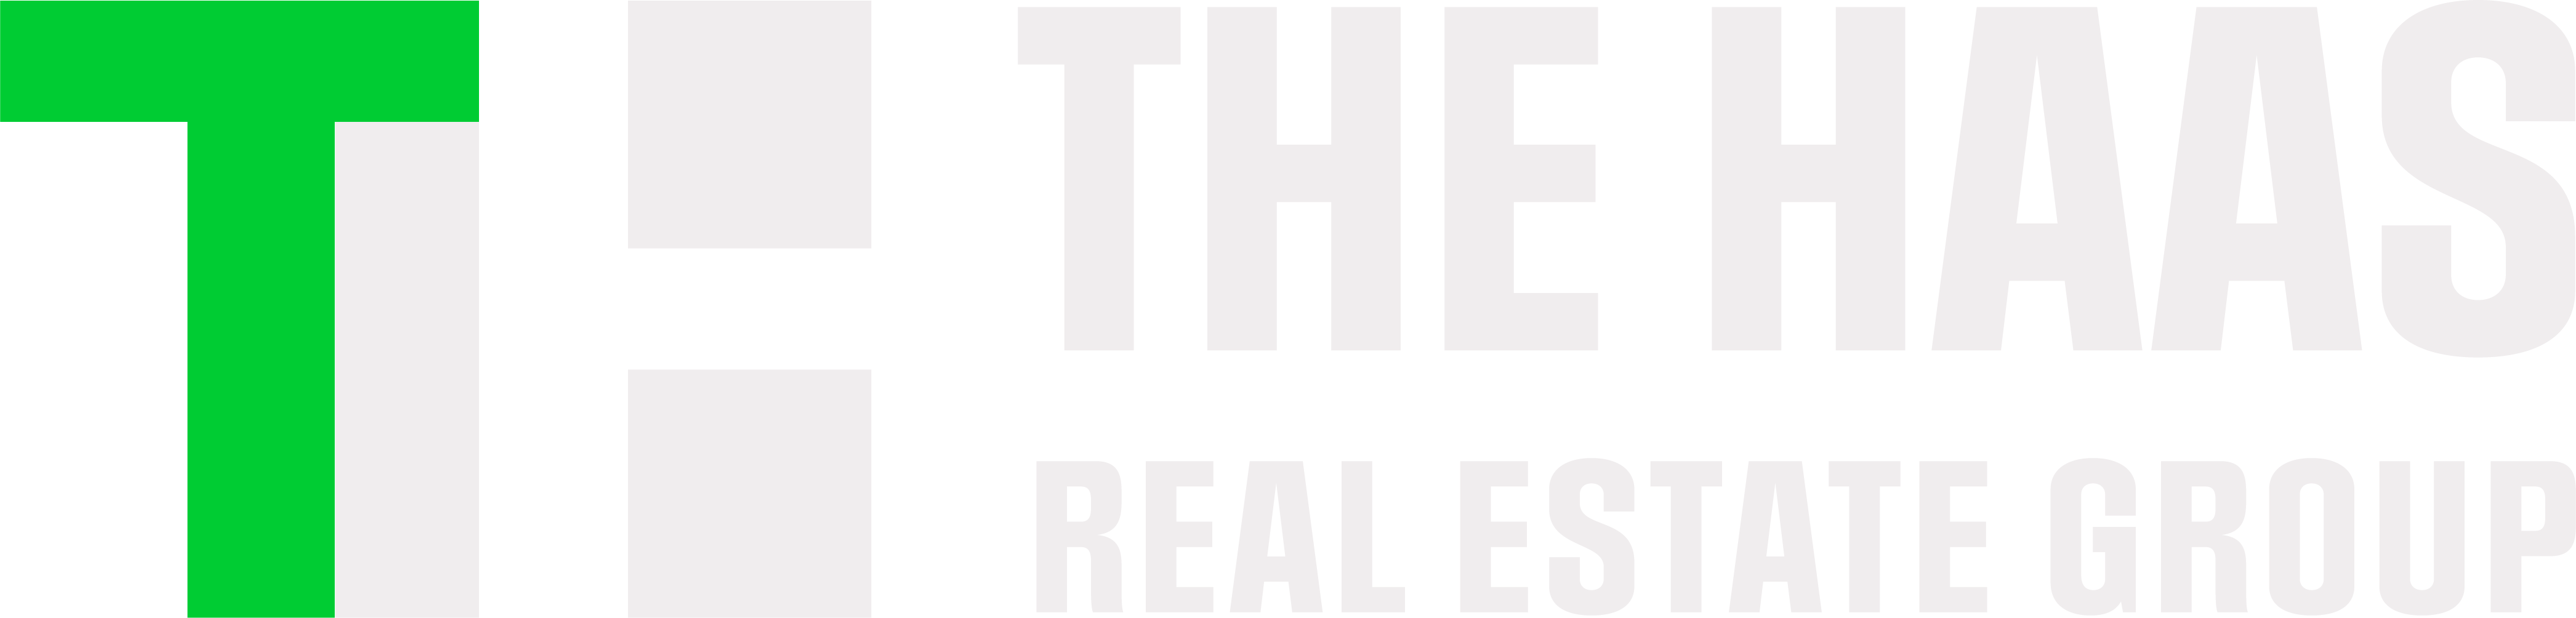 The Haas Real Estate Group